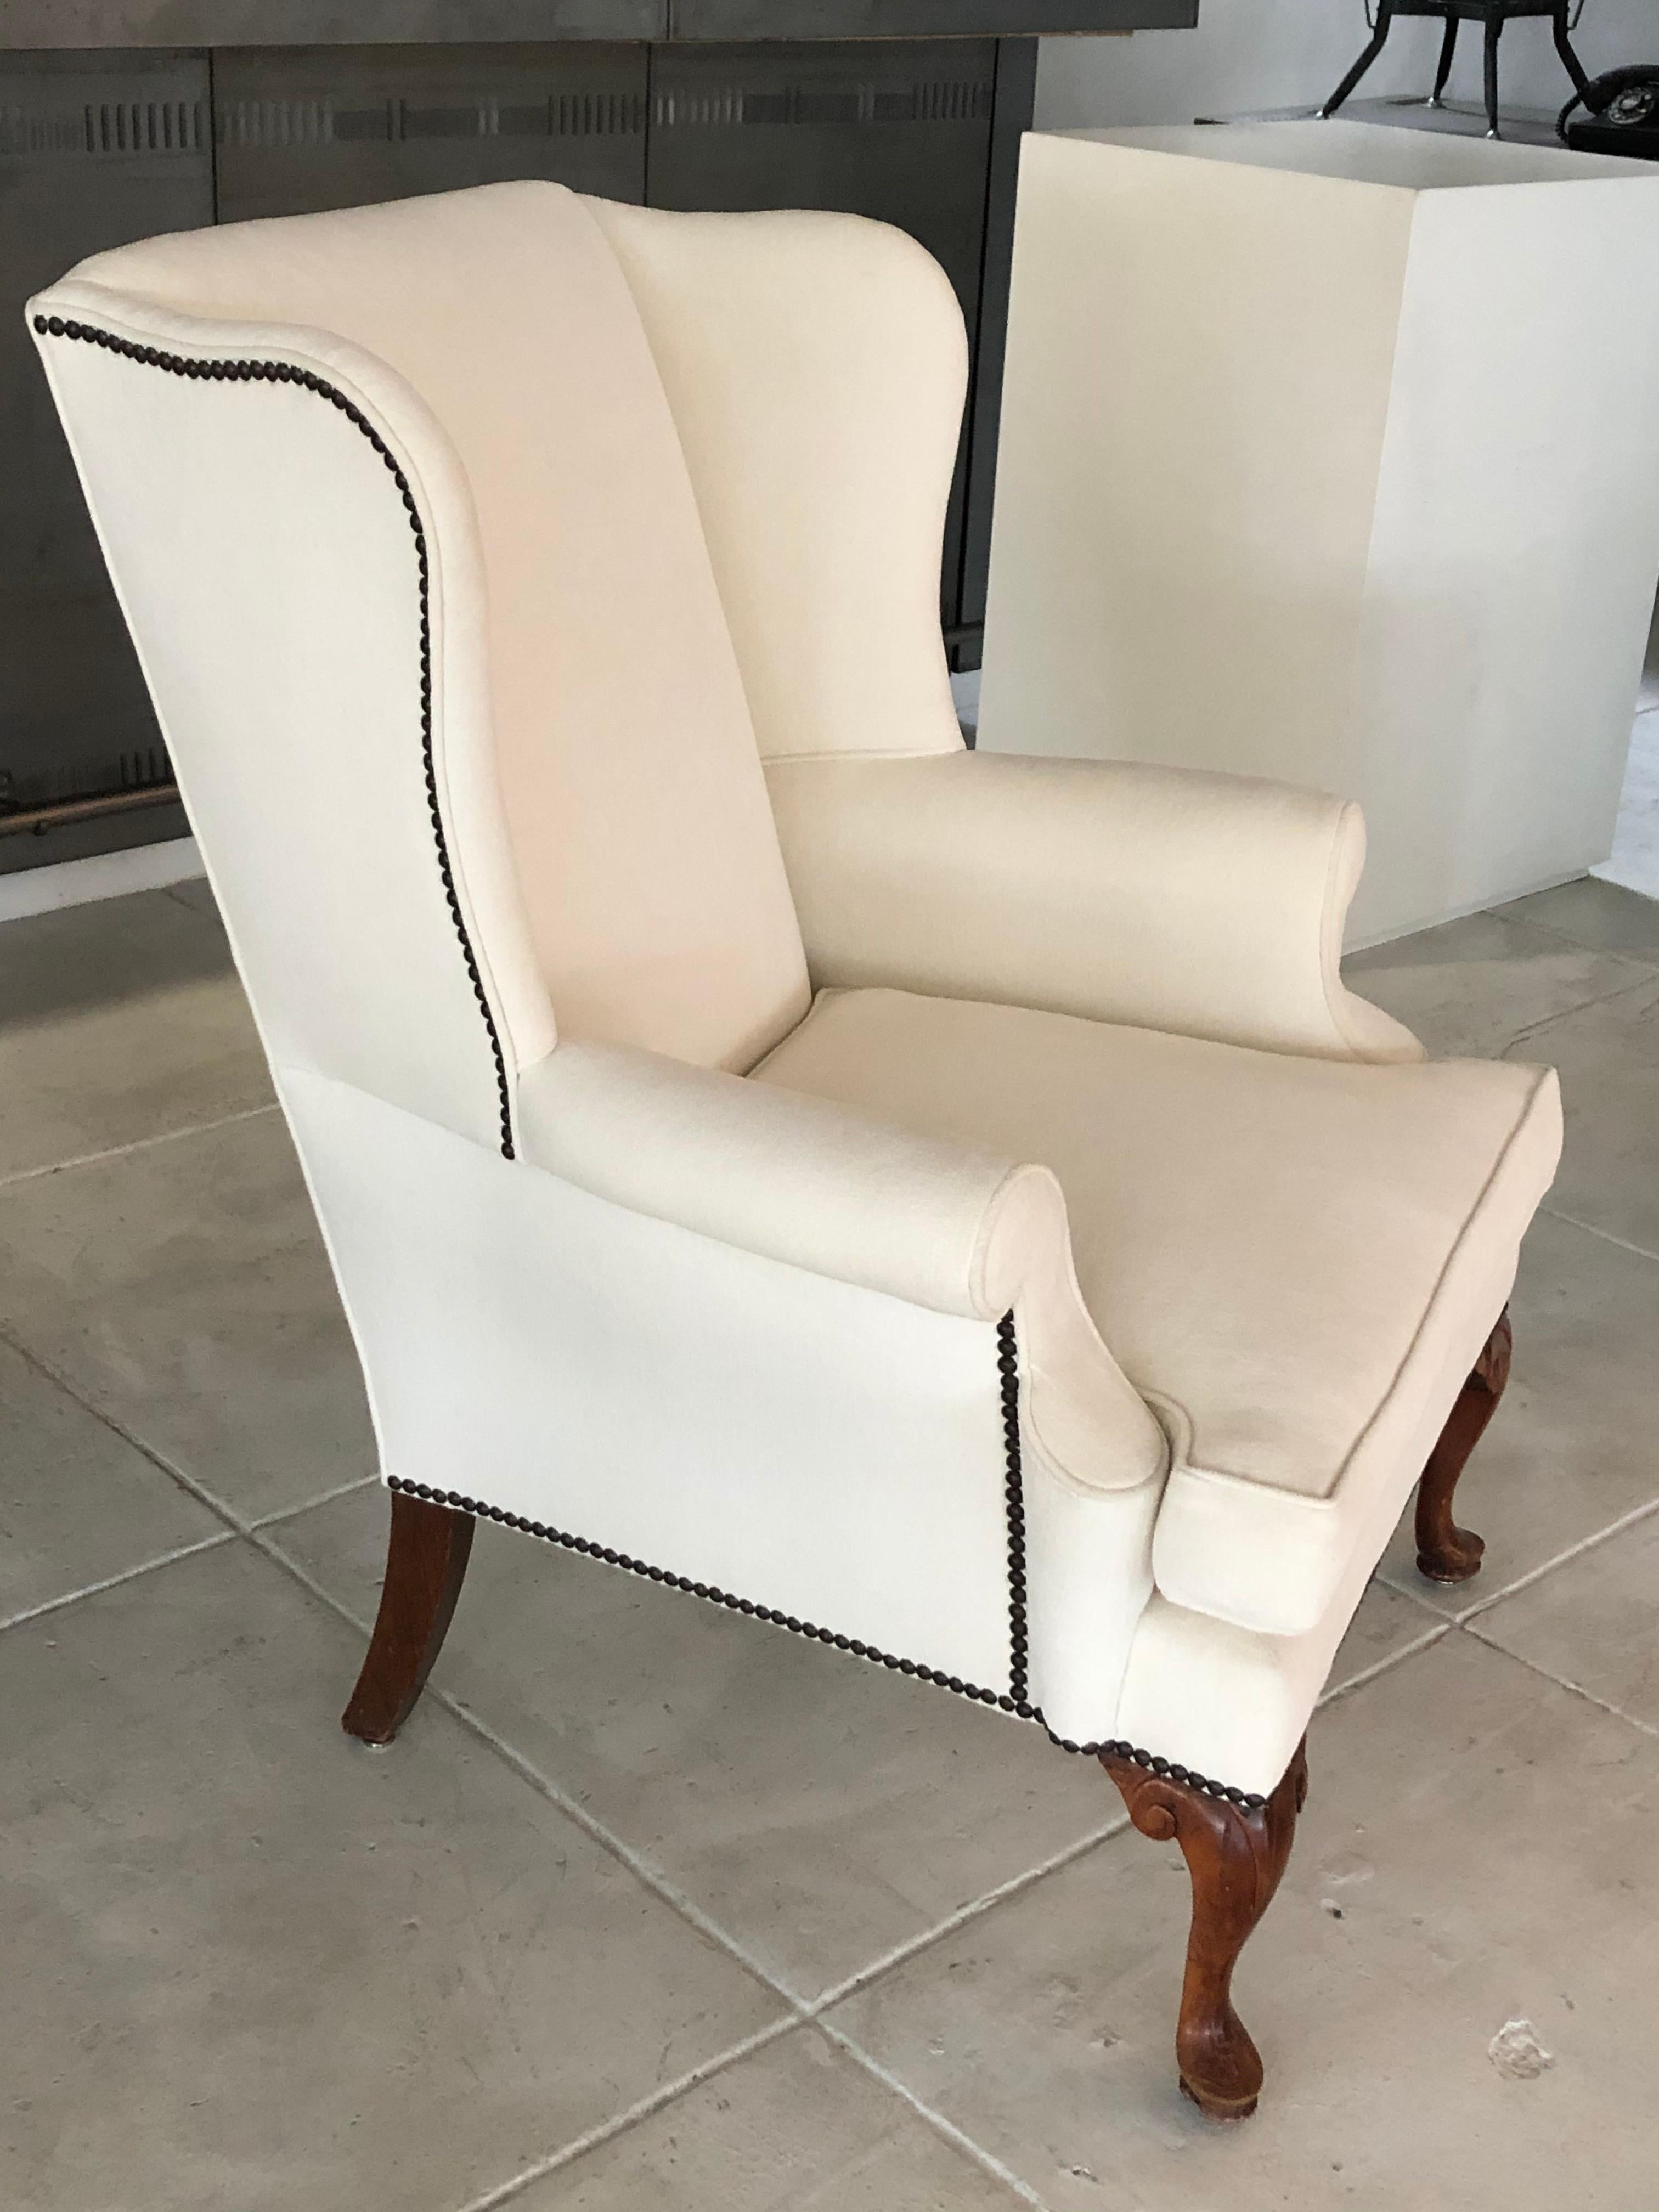 queen anne chairs for sale